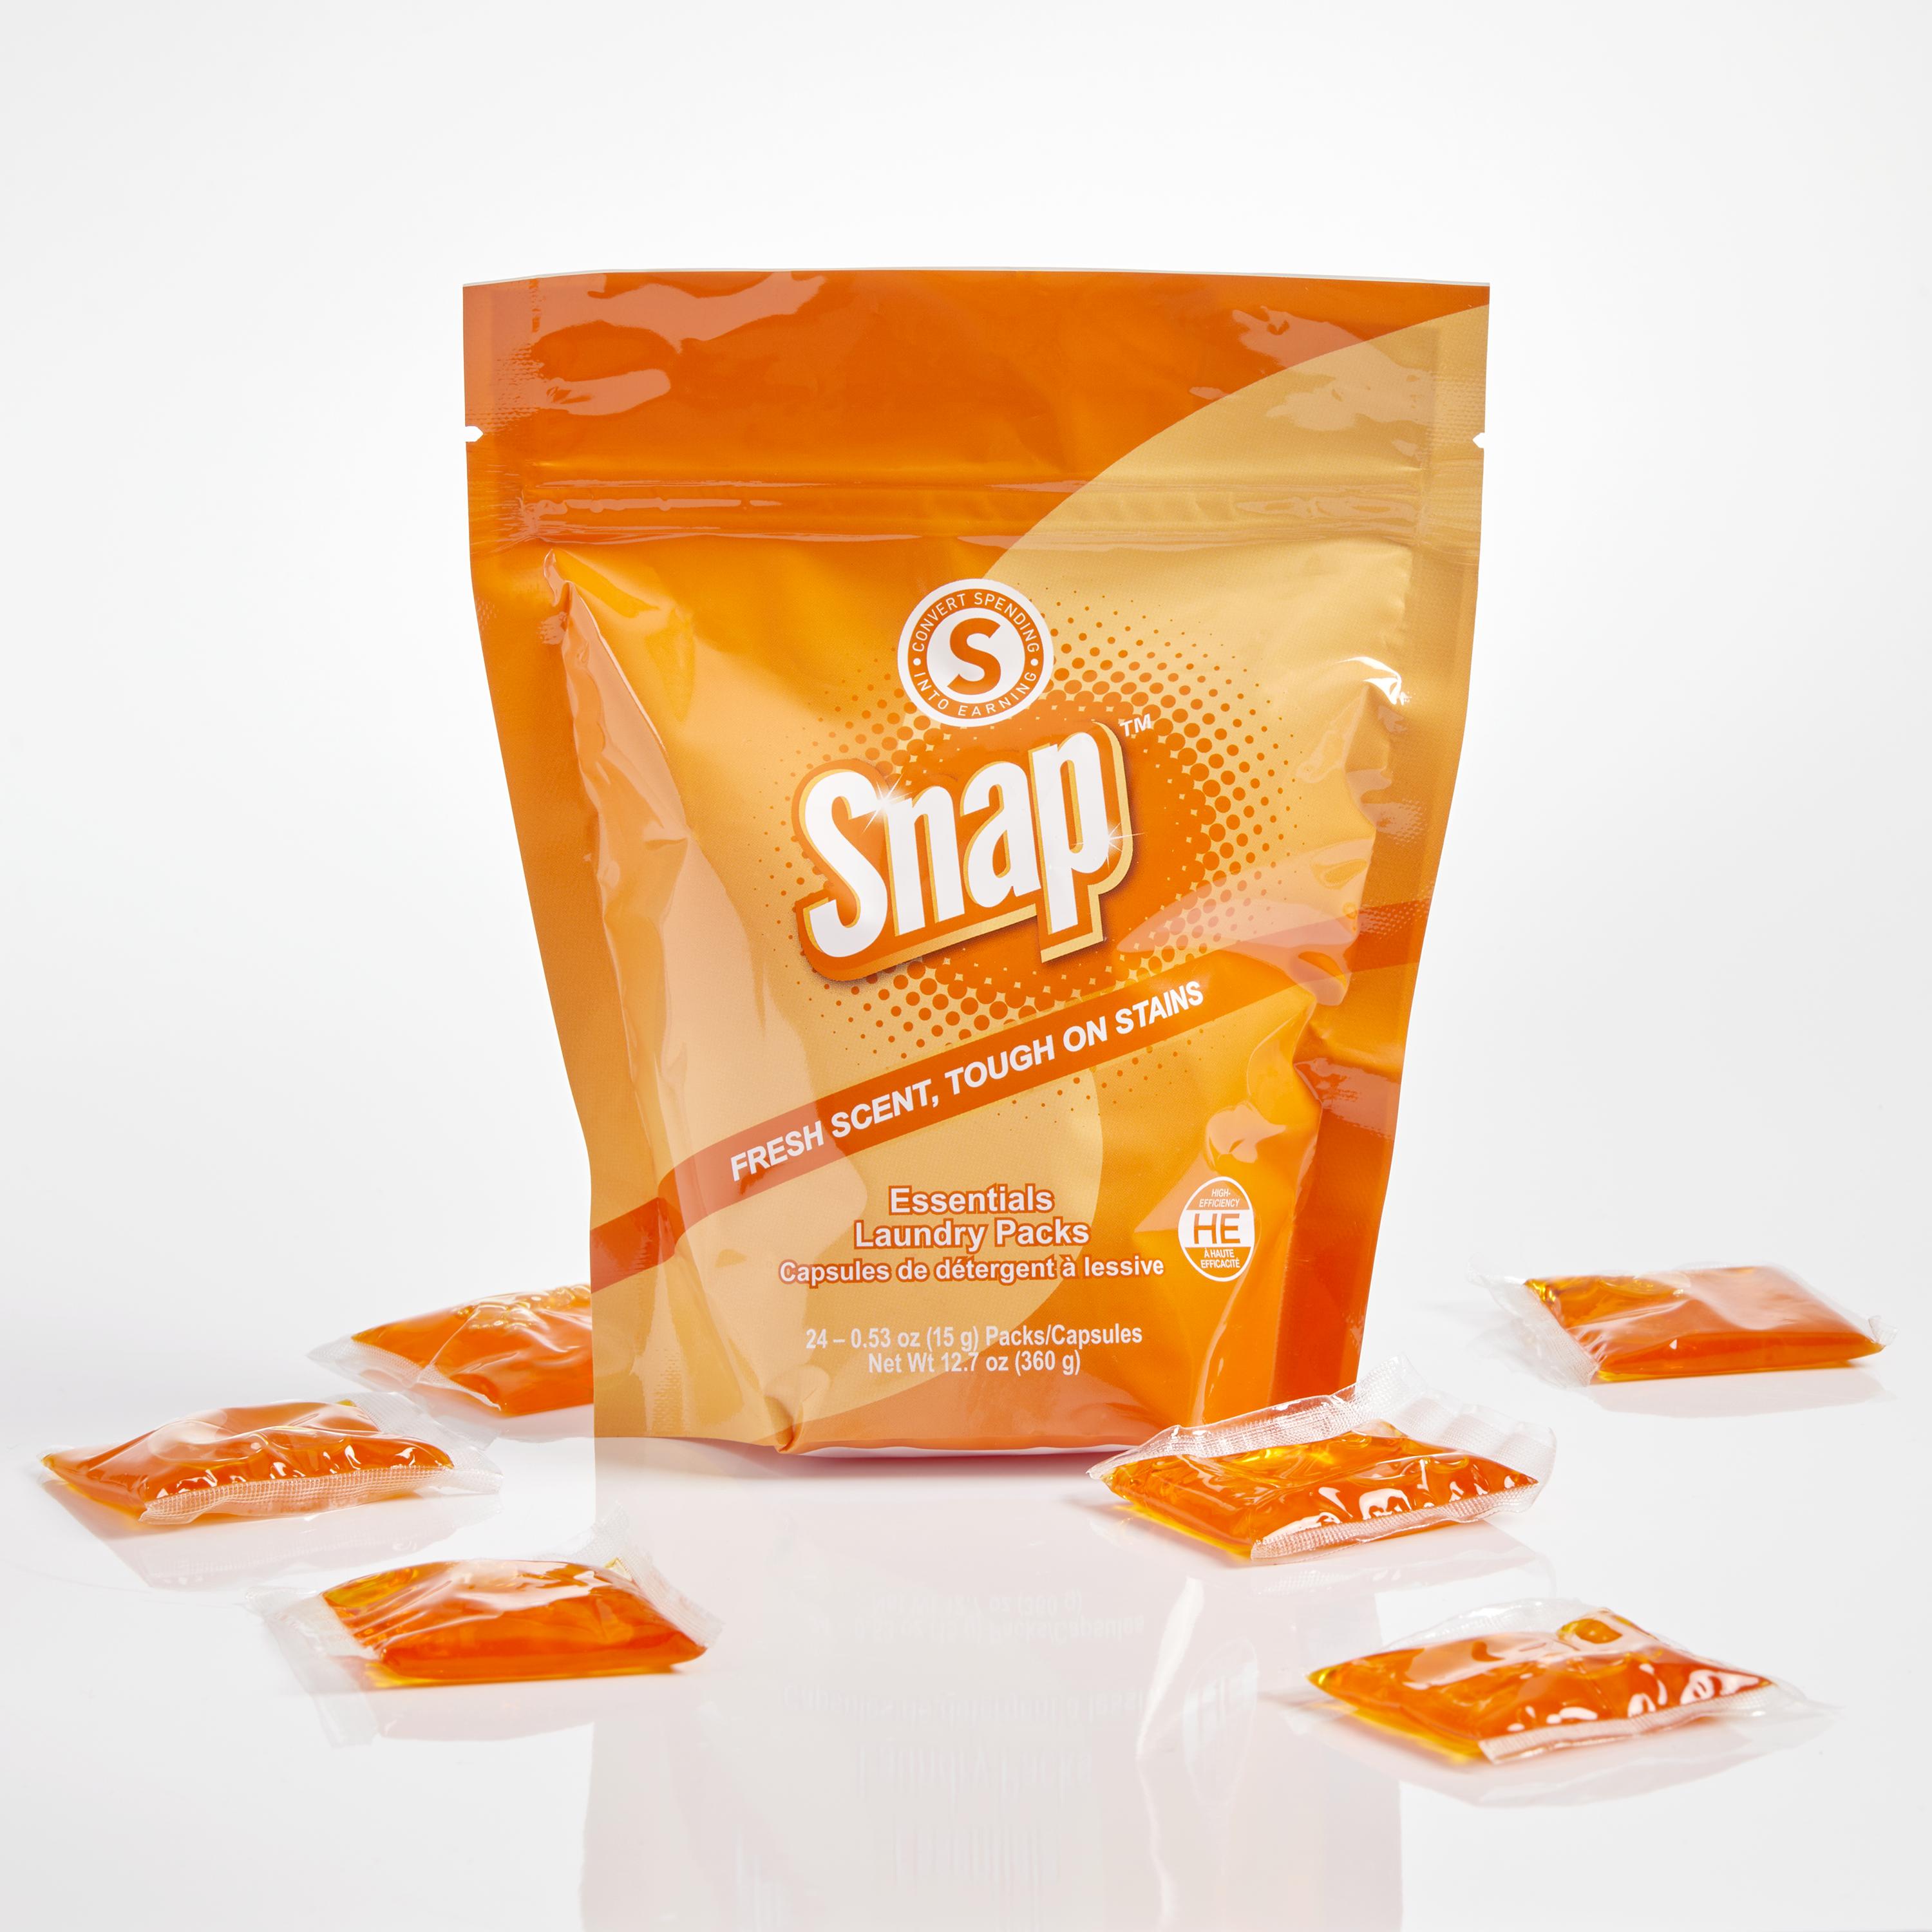 Shopping Annuity&#174; Brand SNAP&#174; Essentials Laundry Packs – Fresh Scent alternate image